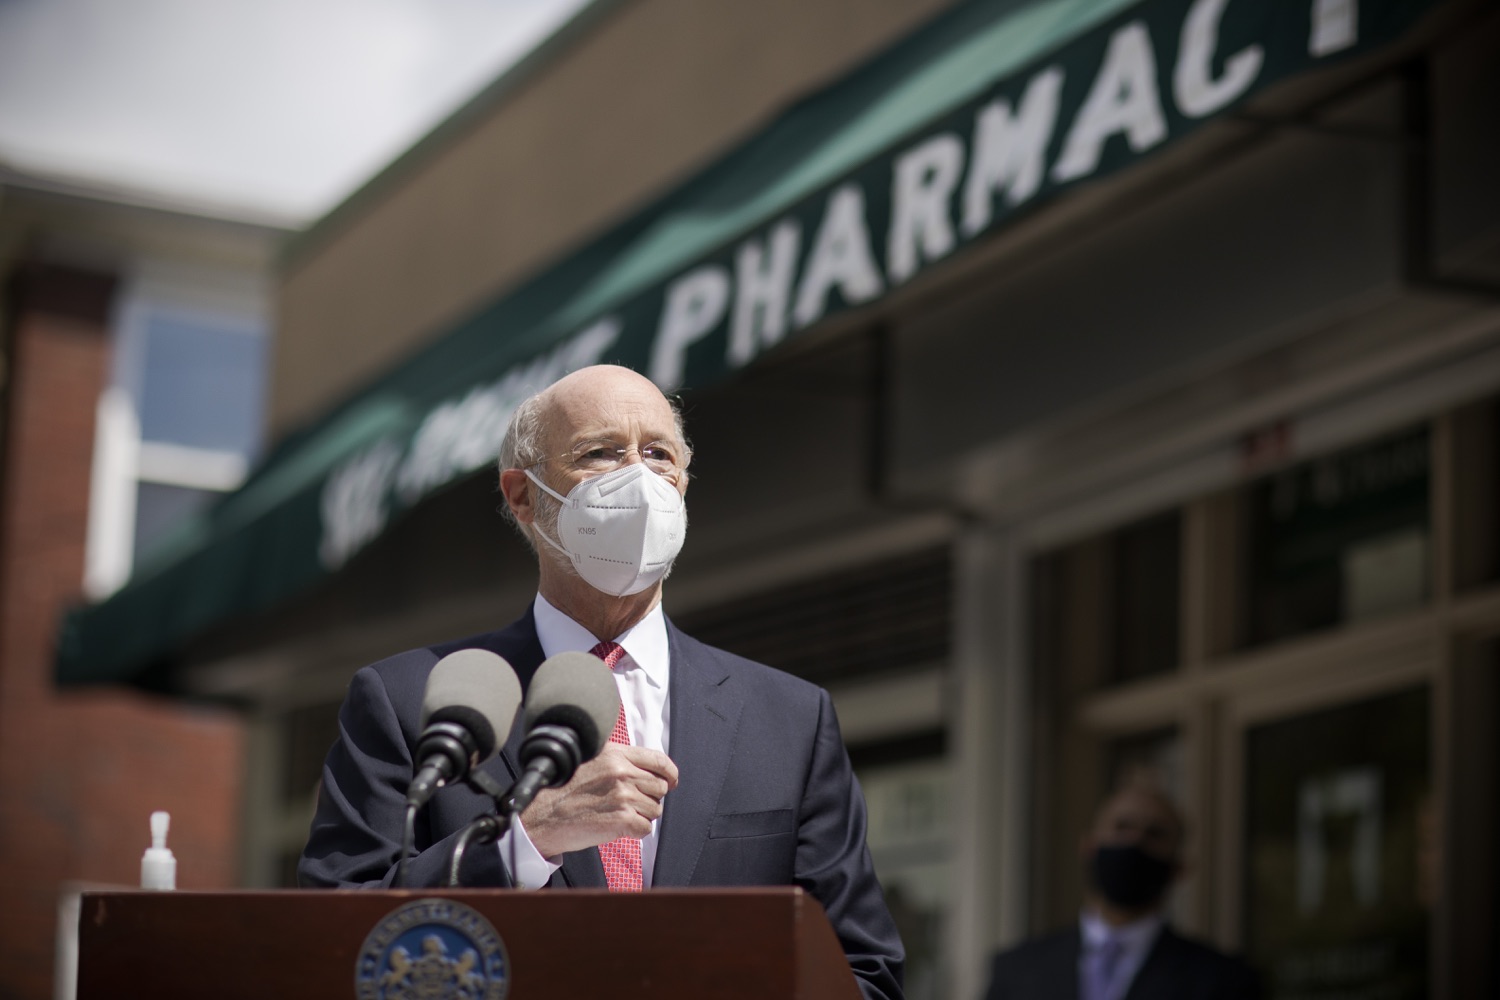 Pennsylvania Governor Tom Wolf speaking with the press.  Governor Tom Wolf today visited See-Right Pharmacy in Harrisburg to learn more about how the local, neighborhood pharmacy is vaccinating community members and to talk about COVID-19 vaccine hesitancy in Pennsylvania. Harrisburg, PA  April 22, 2021<br><a href="https://filesource.amperwave.net/commonwealthofpa/photo/18704_gov_seeRight_dz_018.jpg" target="_blank">⇣ Download Photo</a>